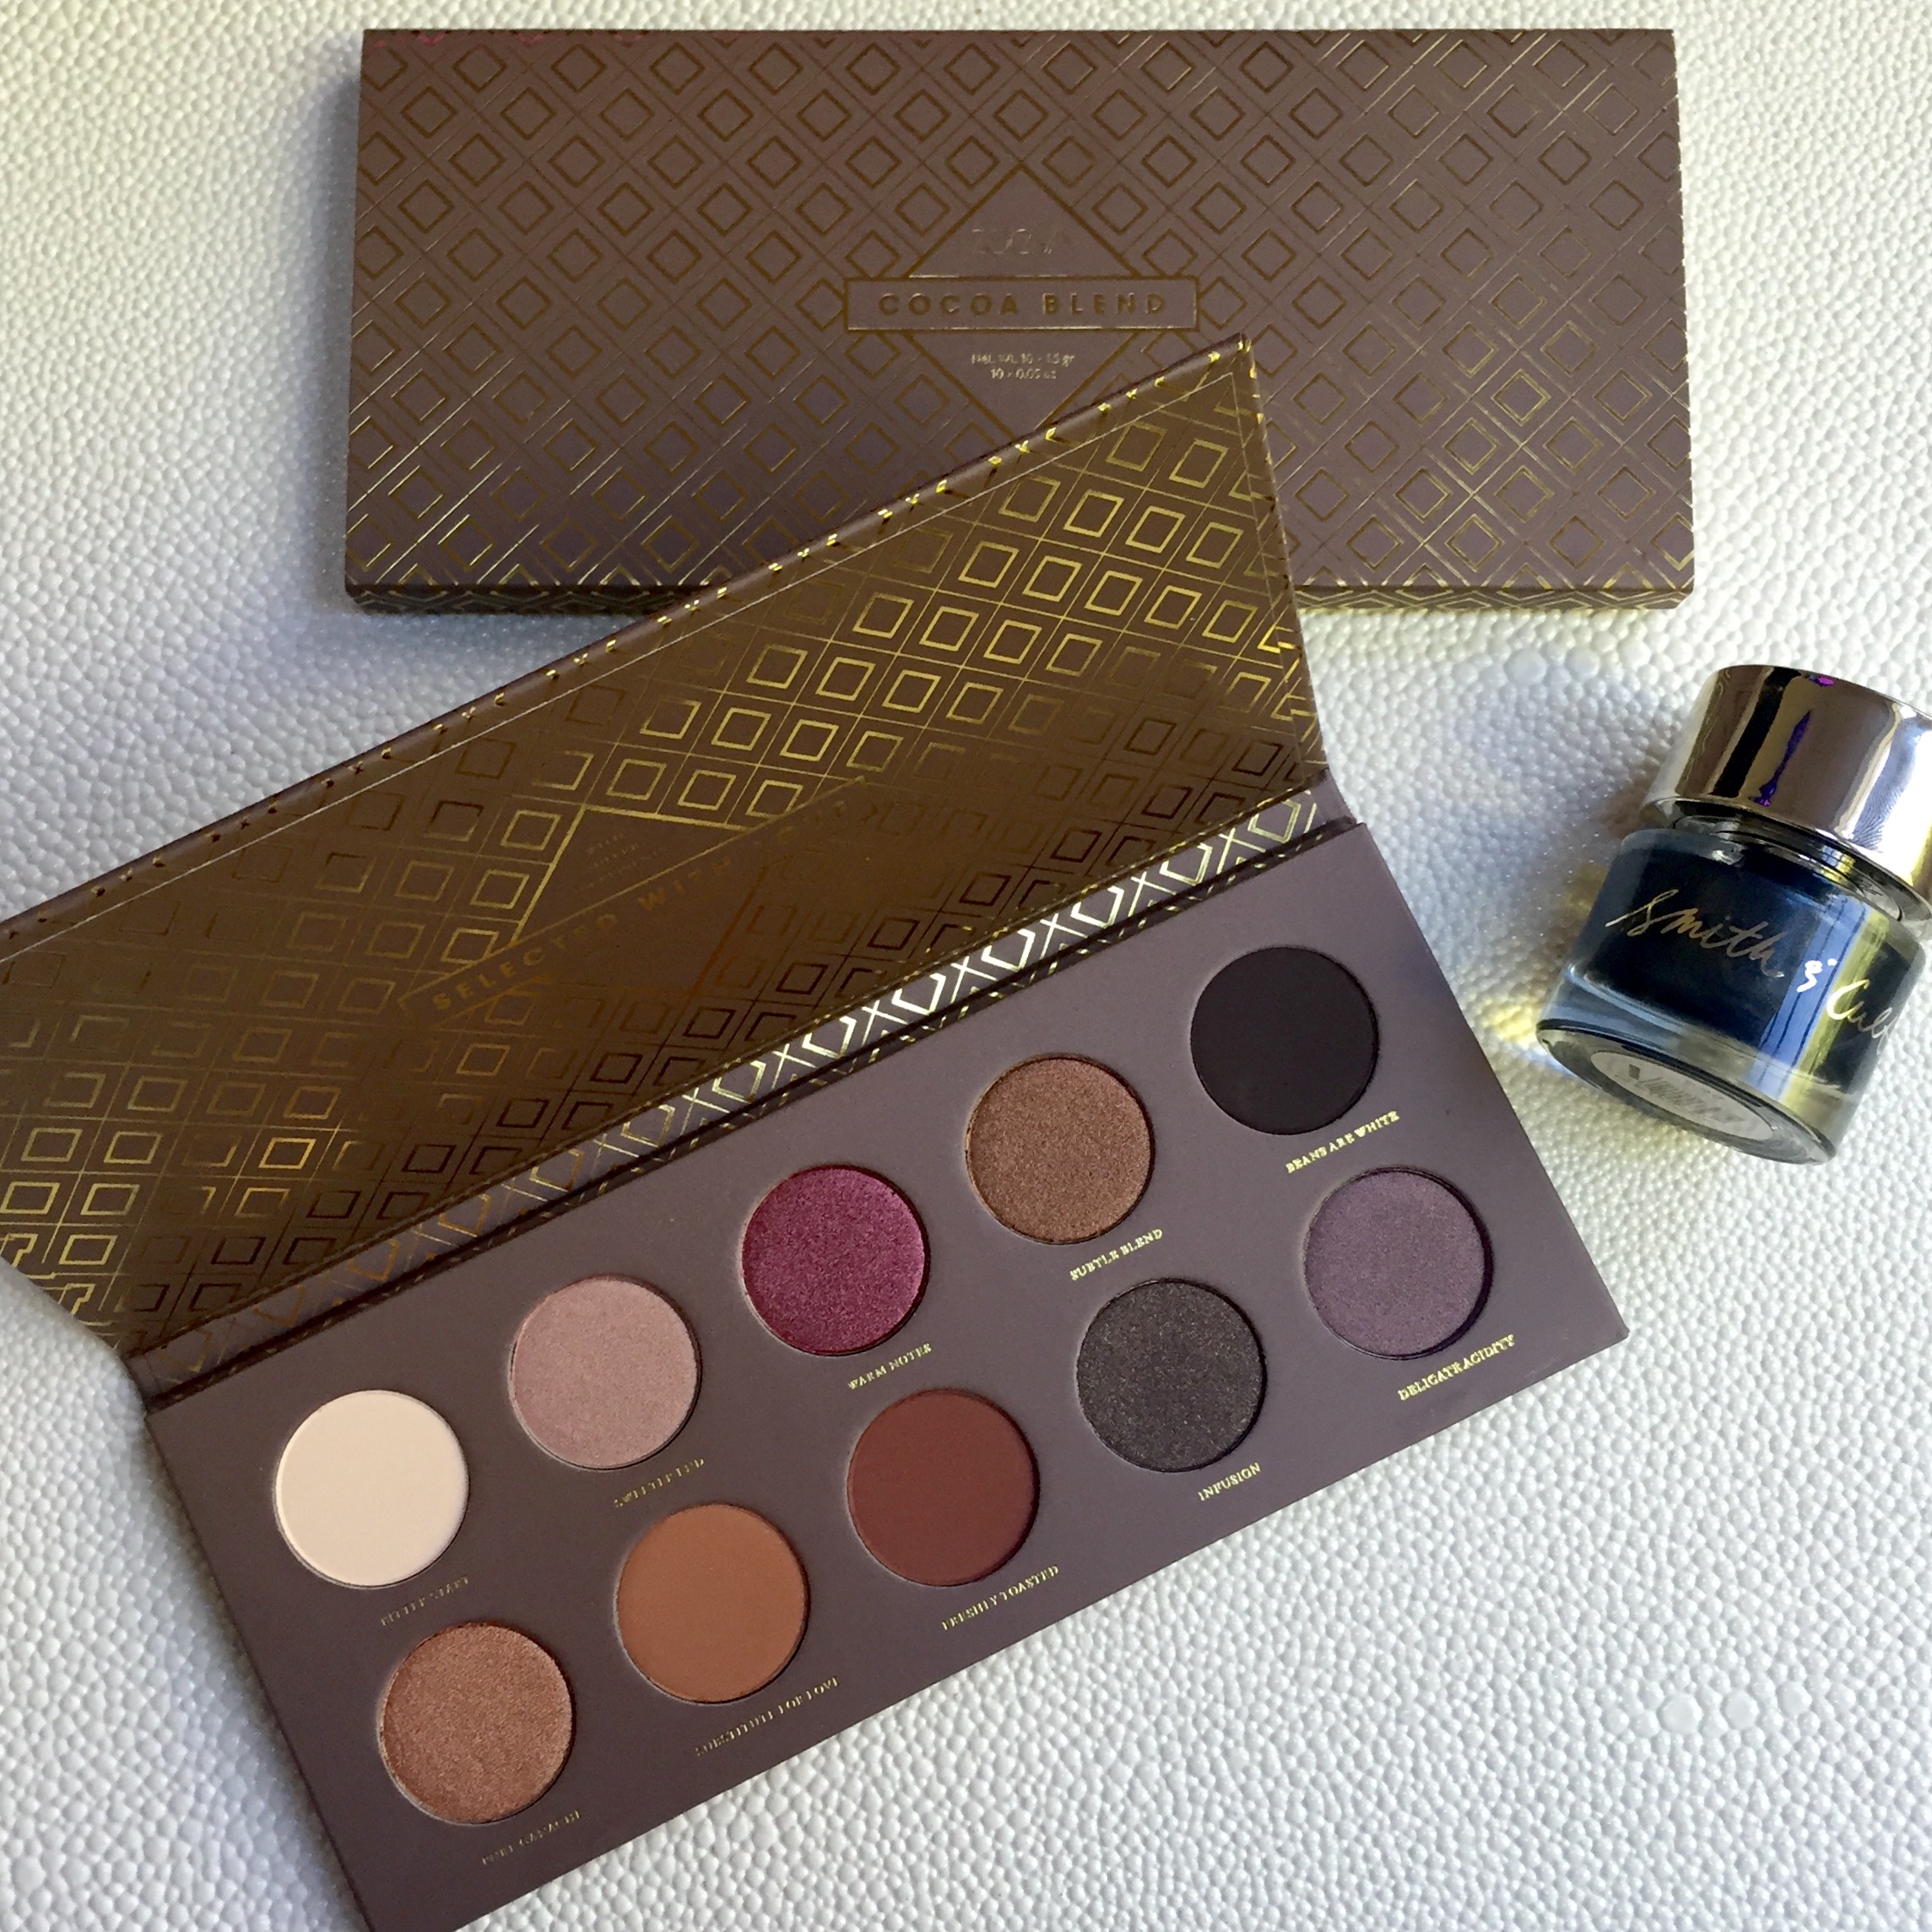 Zoeva Cocoa Blend Palette at Space NK